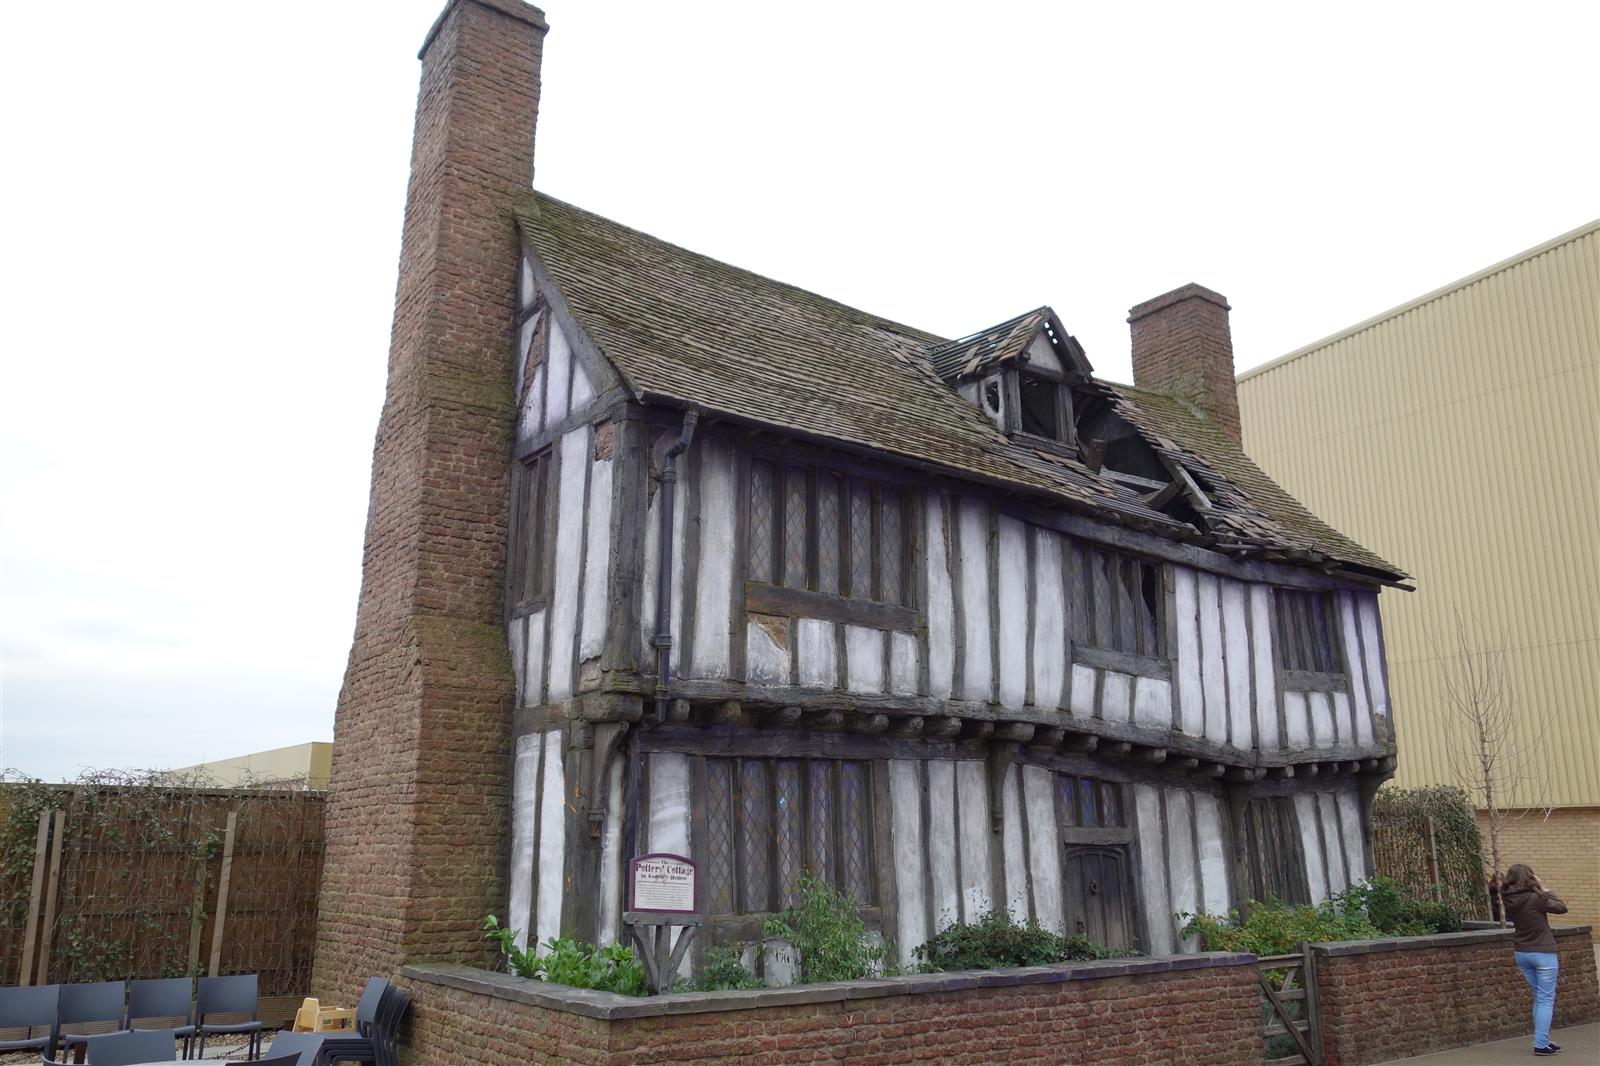 60. Potters' Cottage In Godric's Hollow